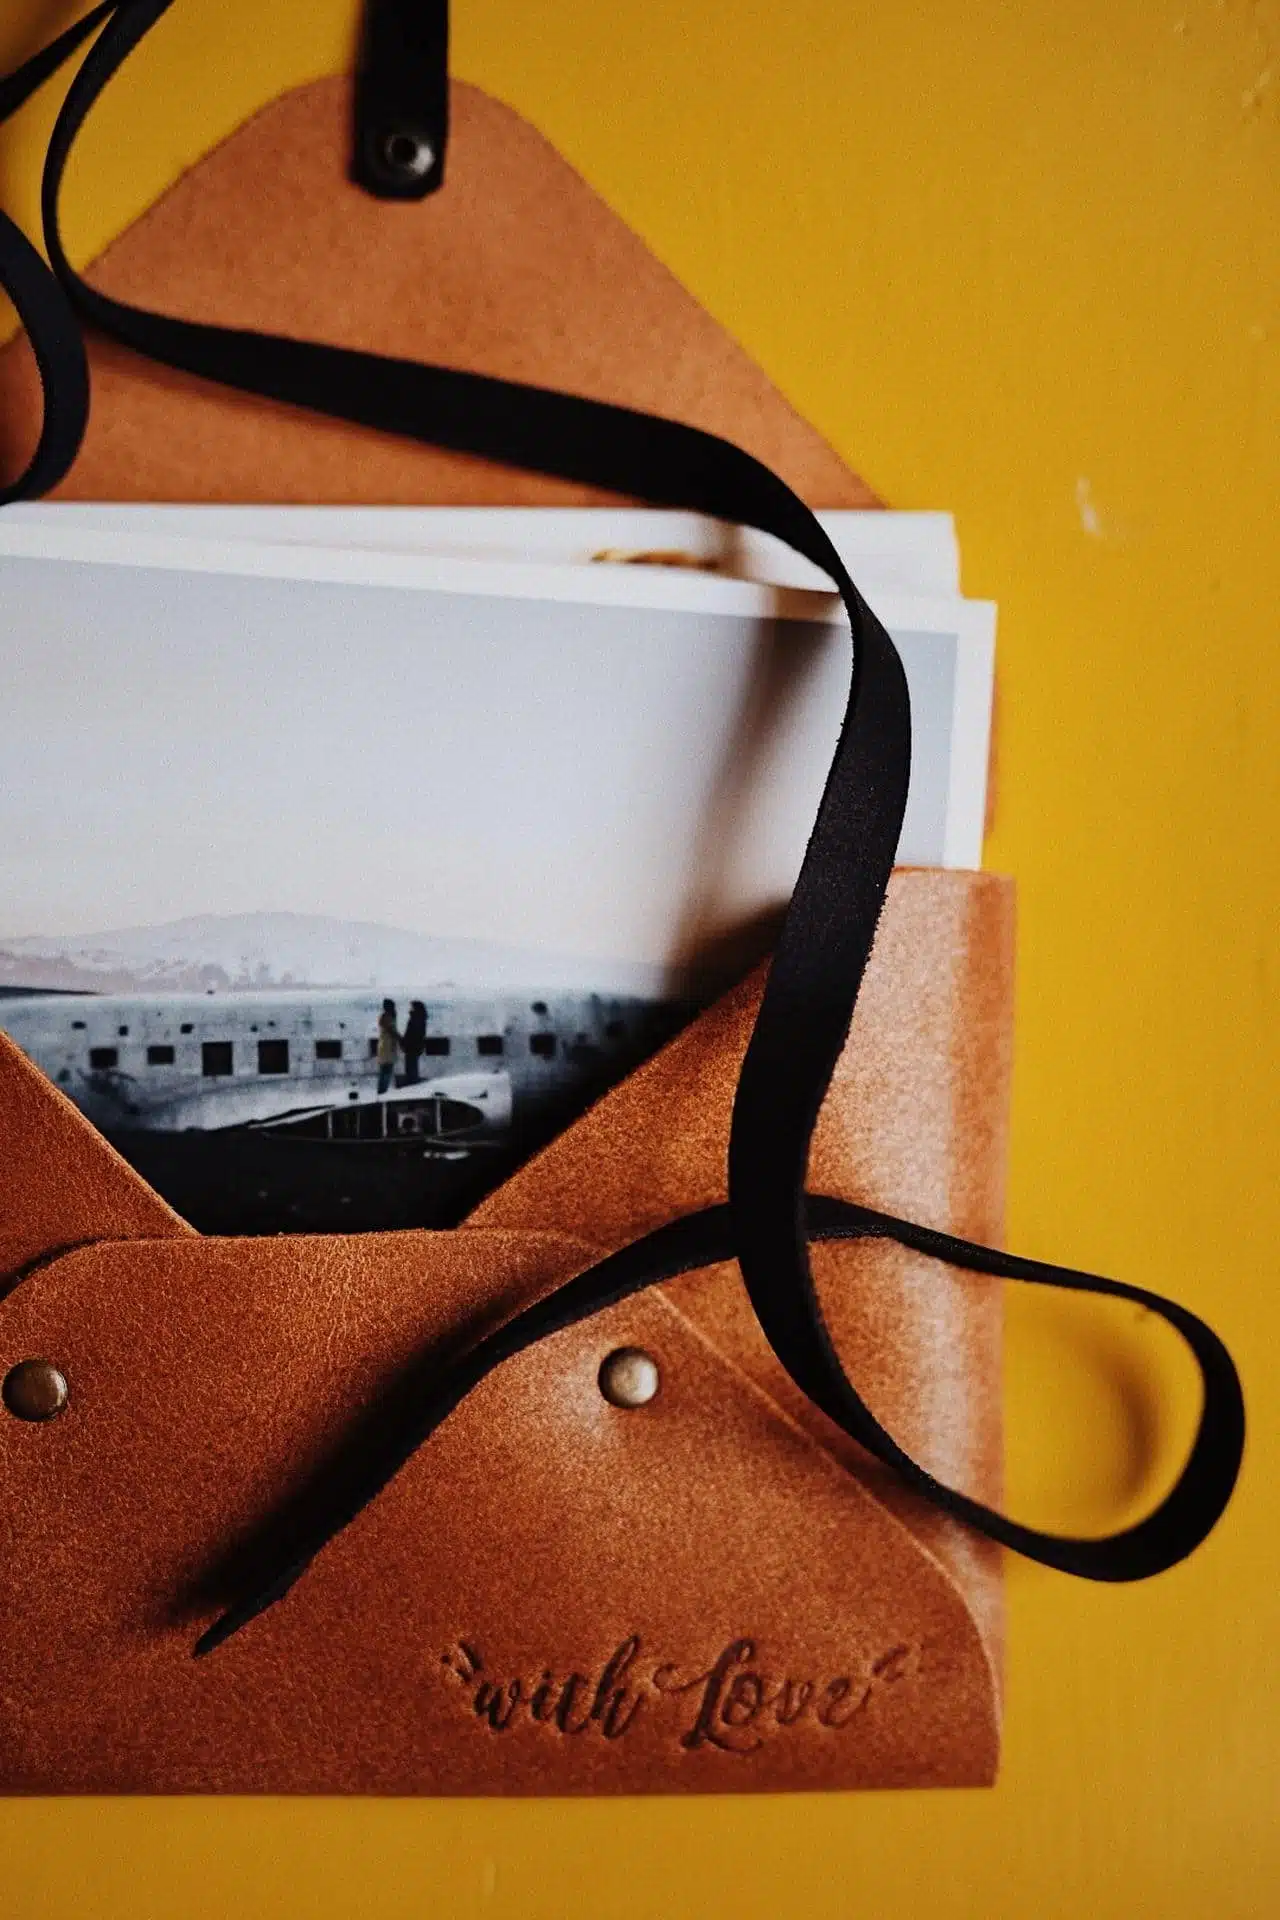 Wild Leather | stripe closing | size S | 10x15cm | 4×6″ | real leather envelope for prints | handmade photography pouch